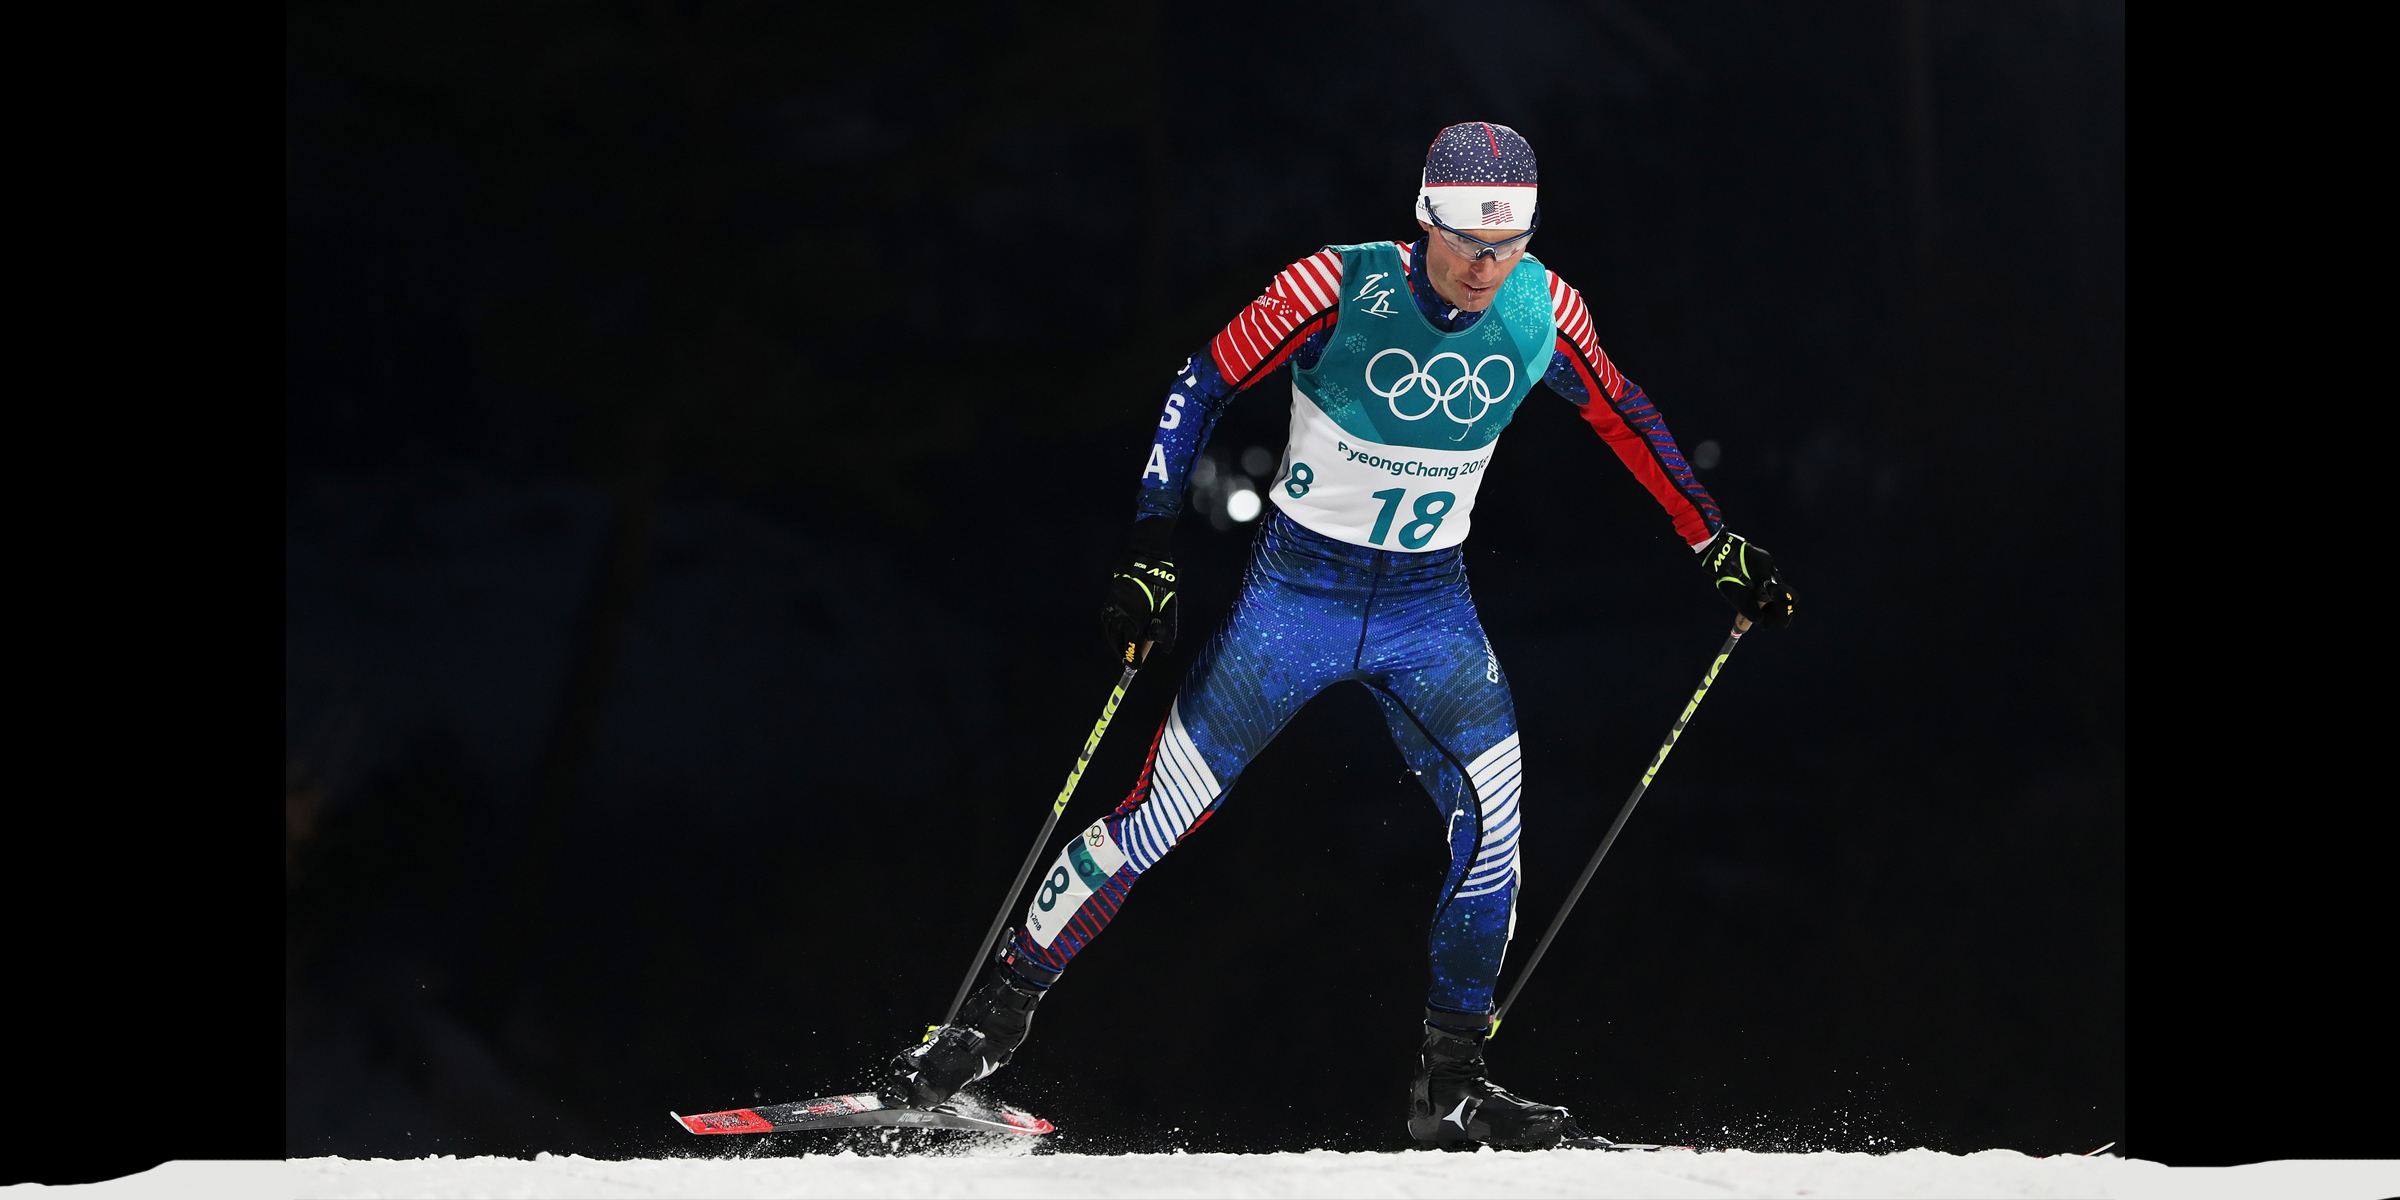 Bryan Fletcher wrapped up his final individual Olympic competition, finishing 17th Gundersen large hill/10k event. (Getty Images – Al Bello)